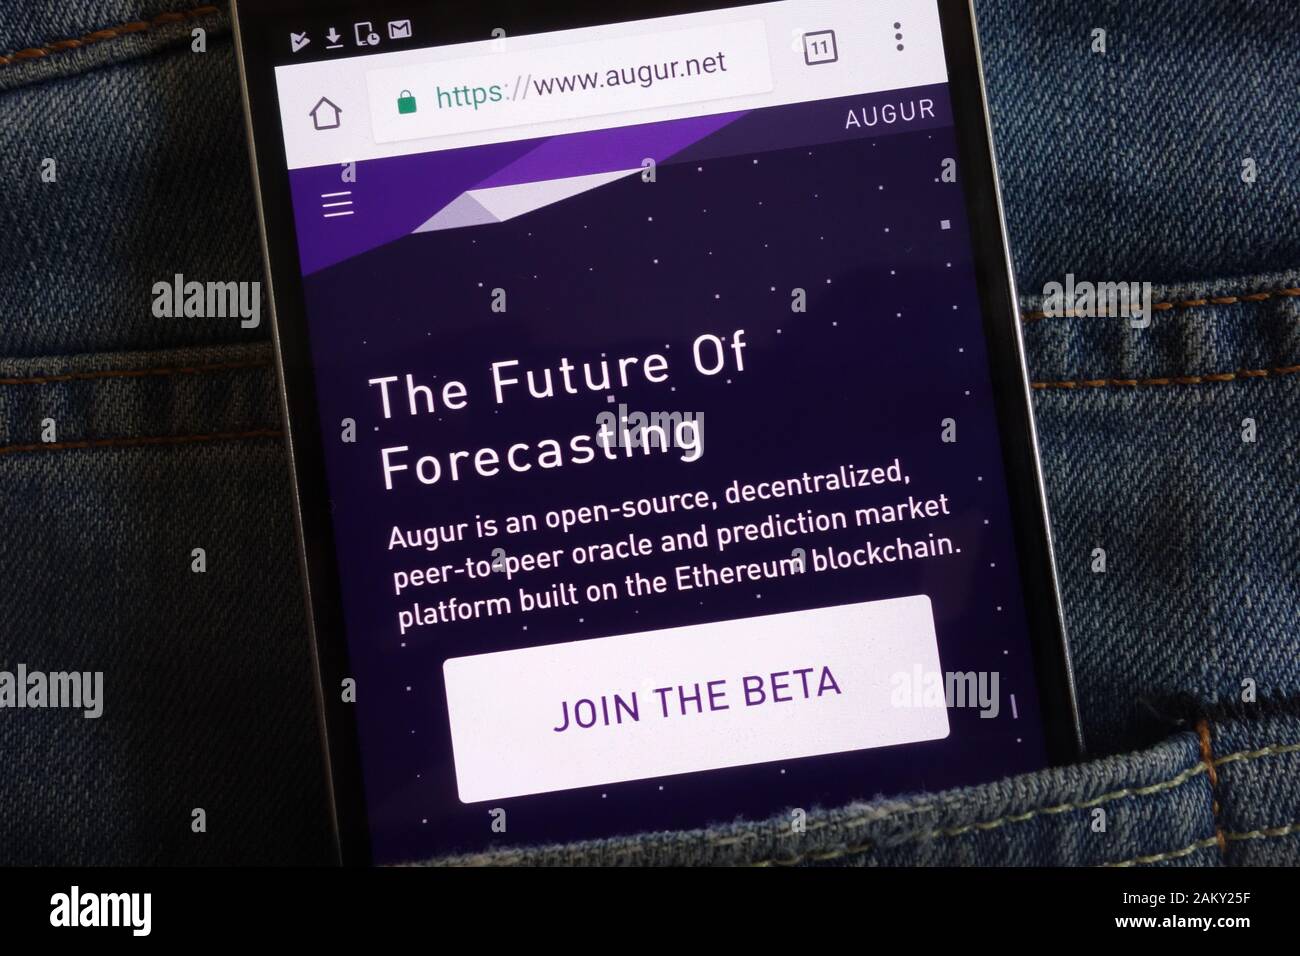 Augur cryptocurrency website displayed on smartphone hidden in jeans pocket Stock Photo